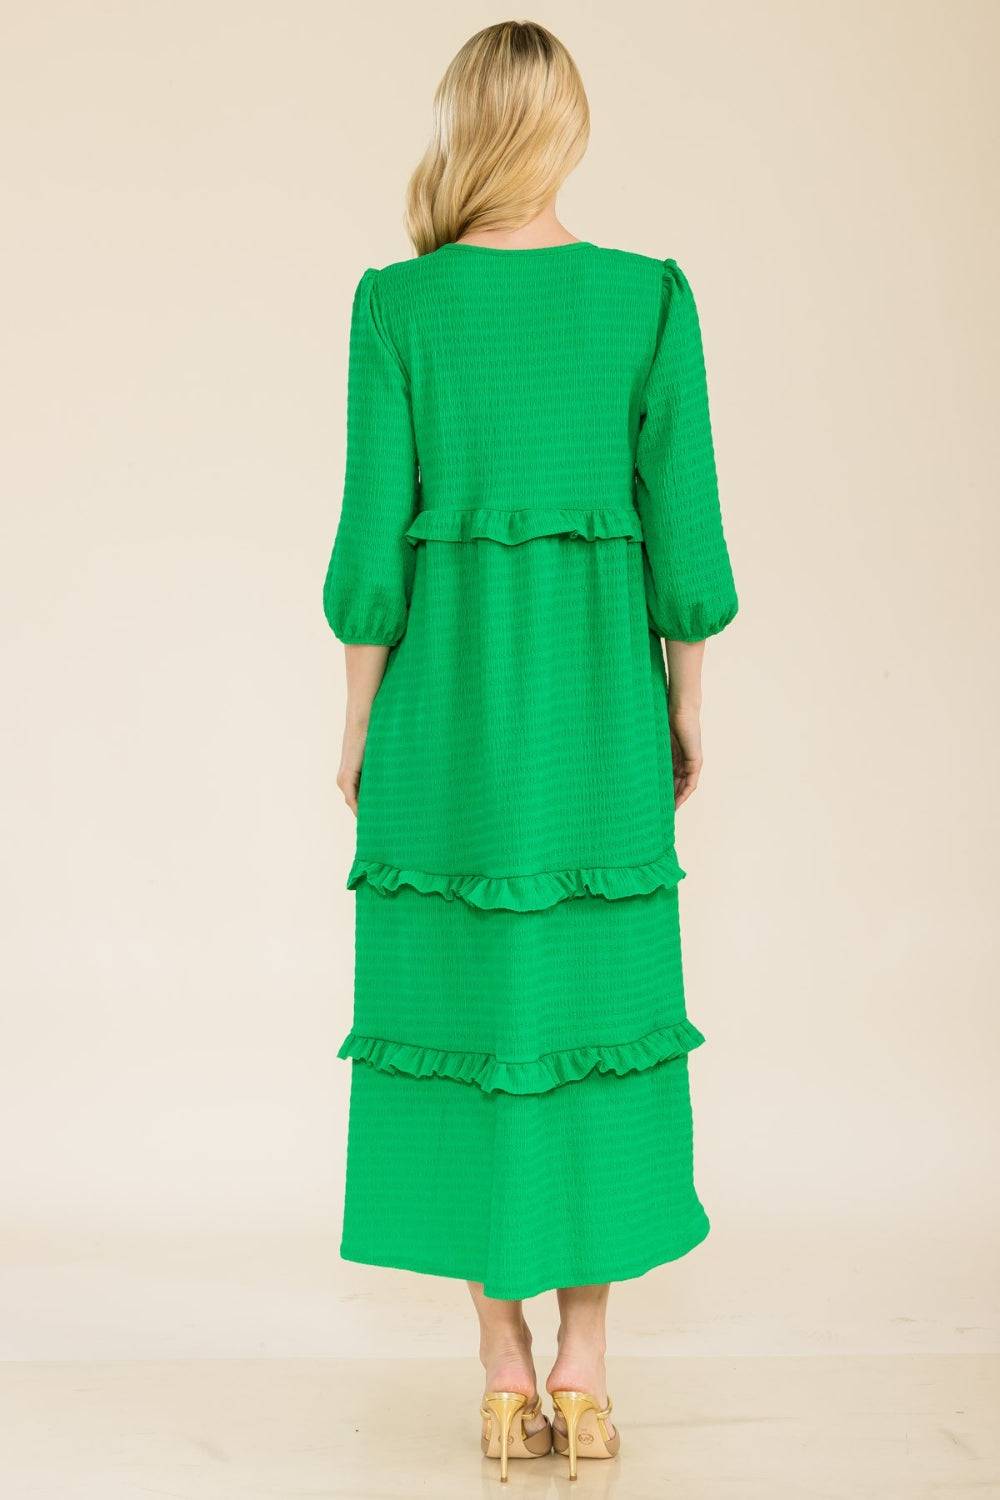 a woman wearing a green dress with tiered layers